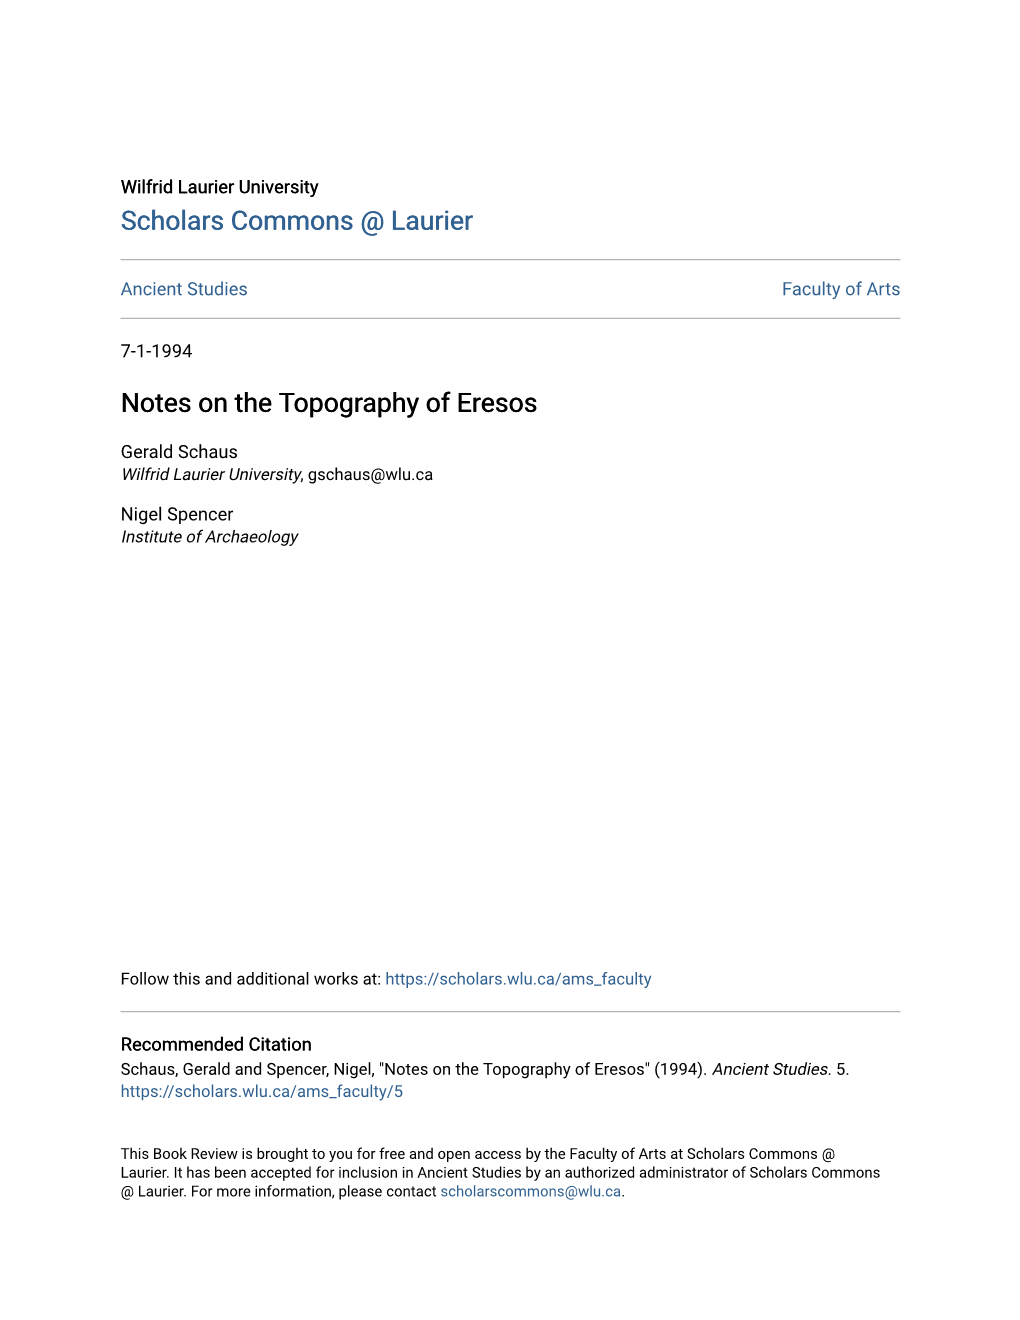 Notes on the Topography of Eresos